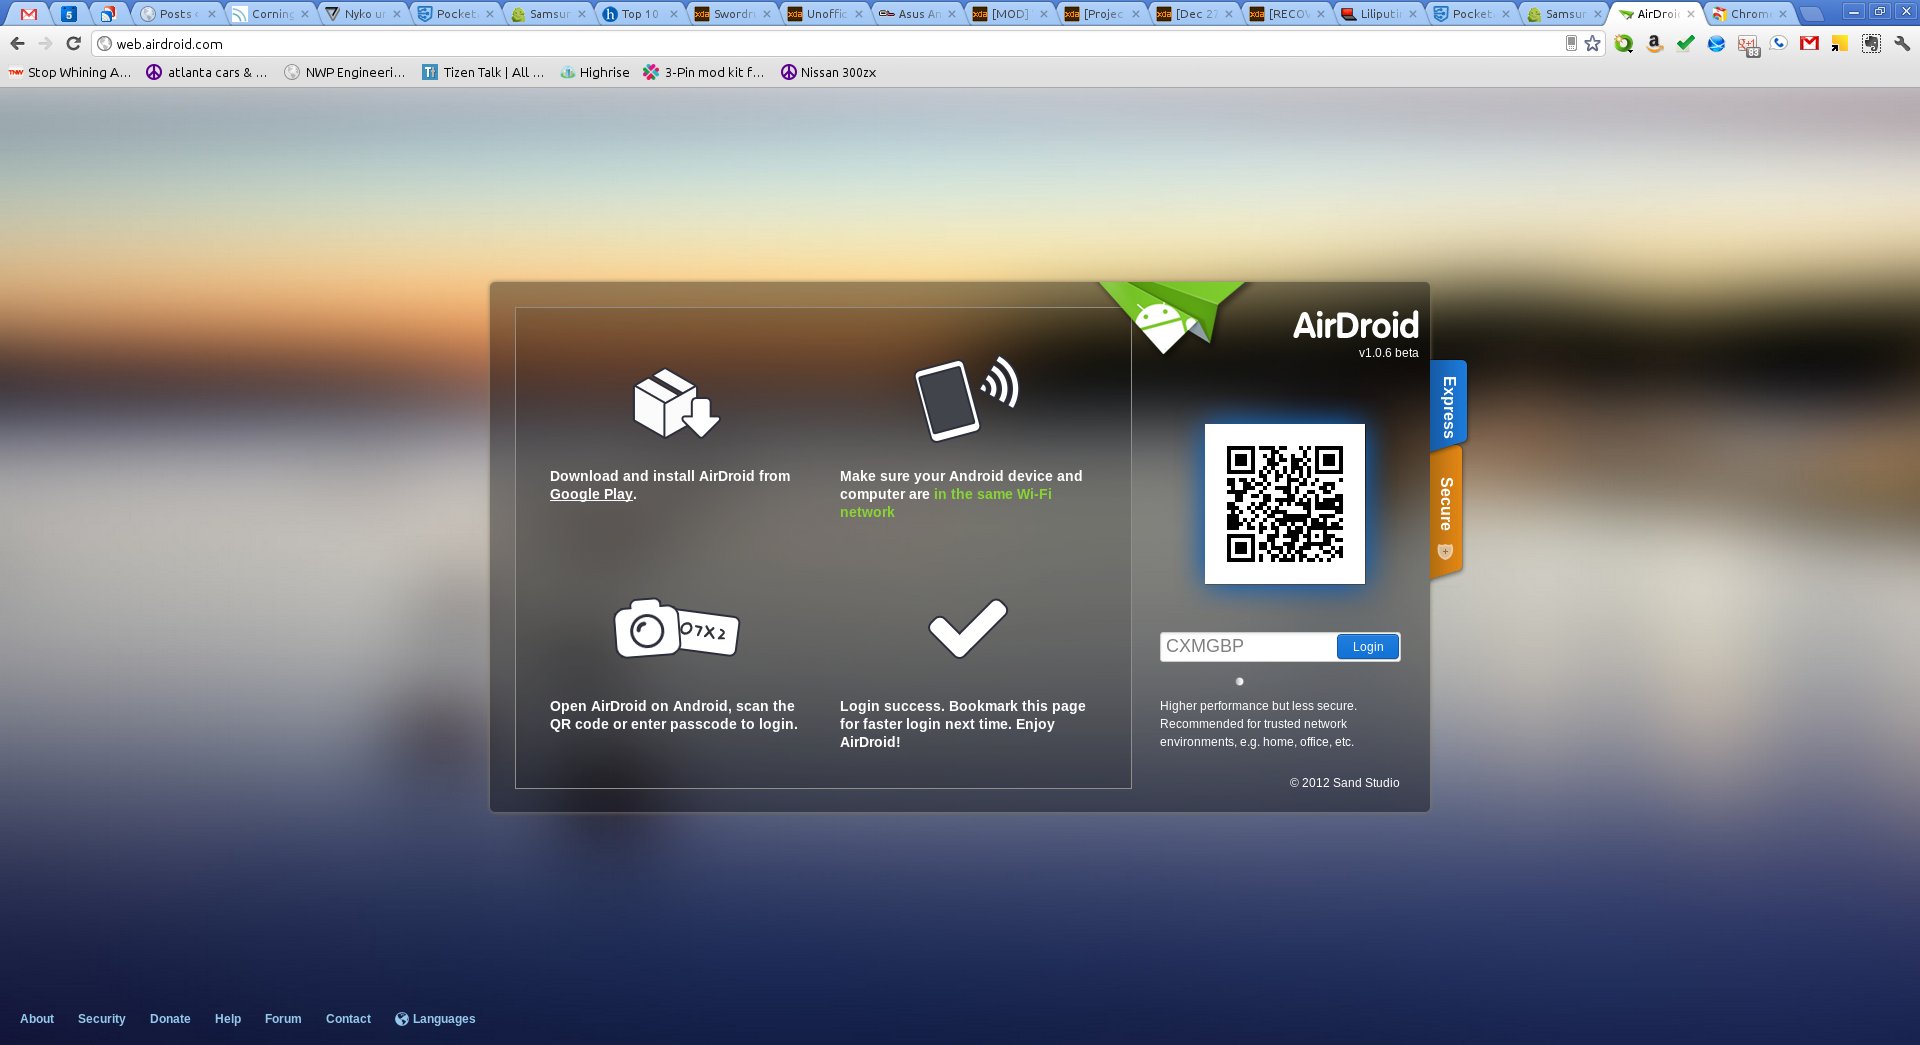 airdroid pc1 - for some reason we don't have an alt tag here